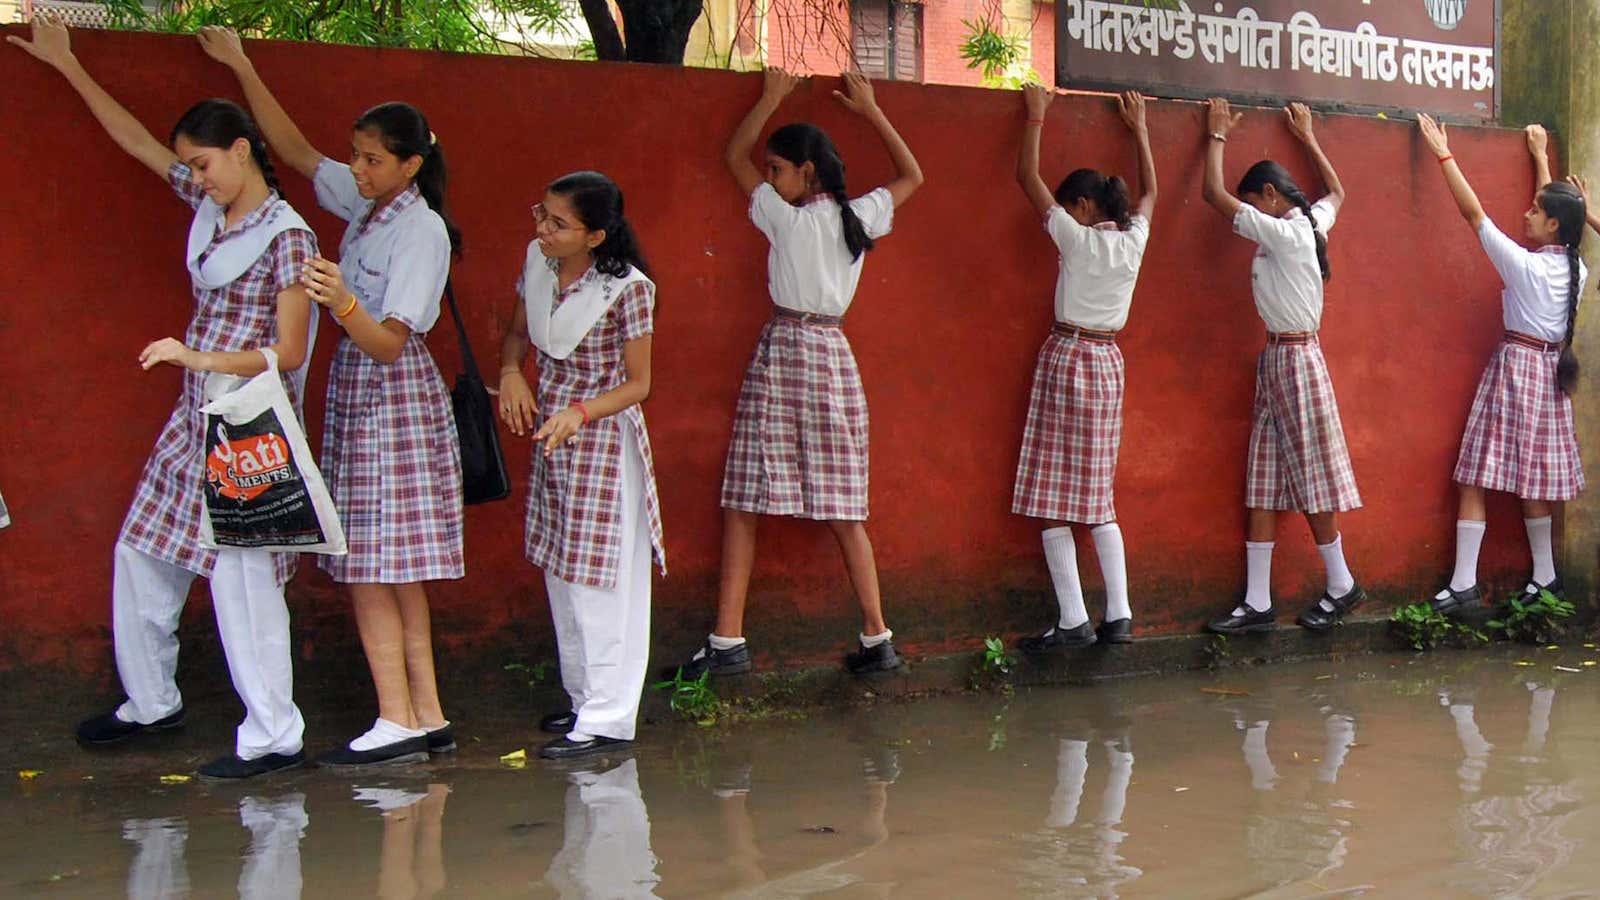 Even reaching school is hard for girls in India.